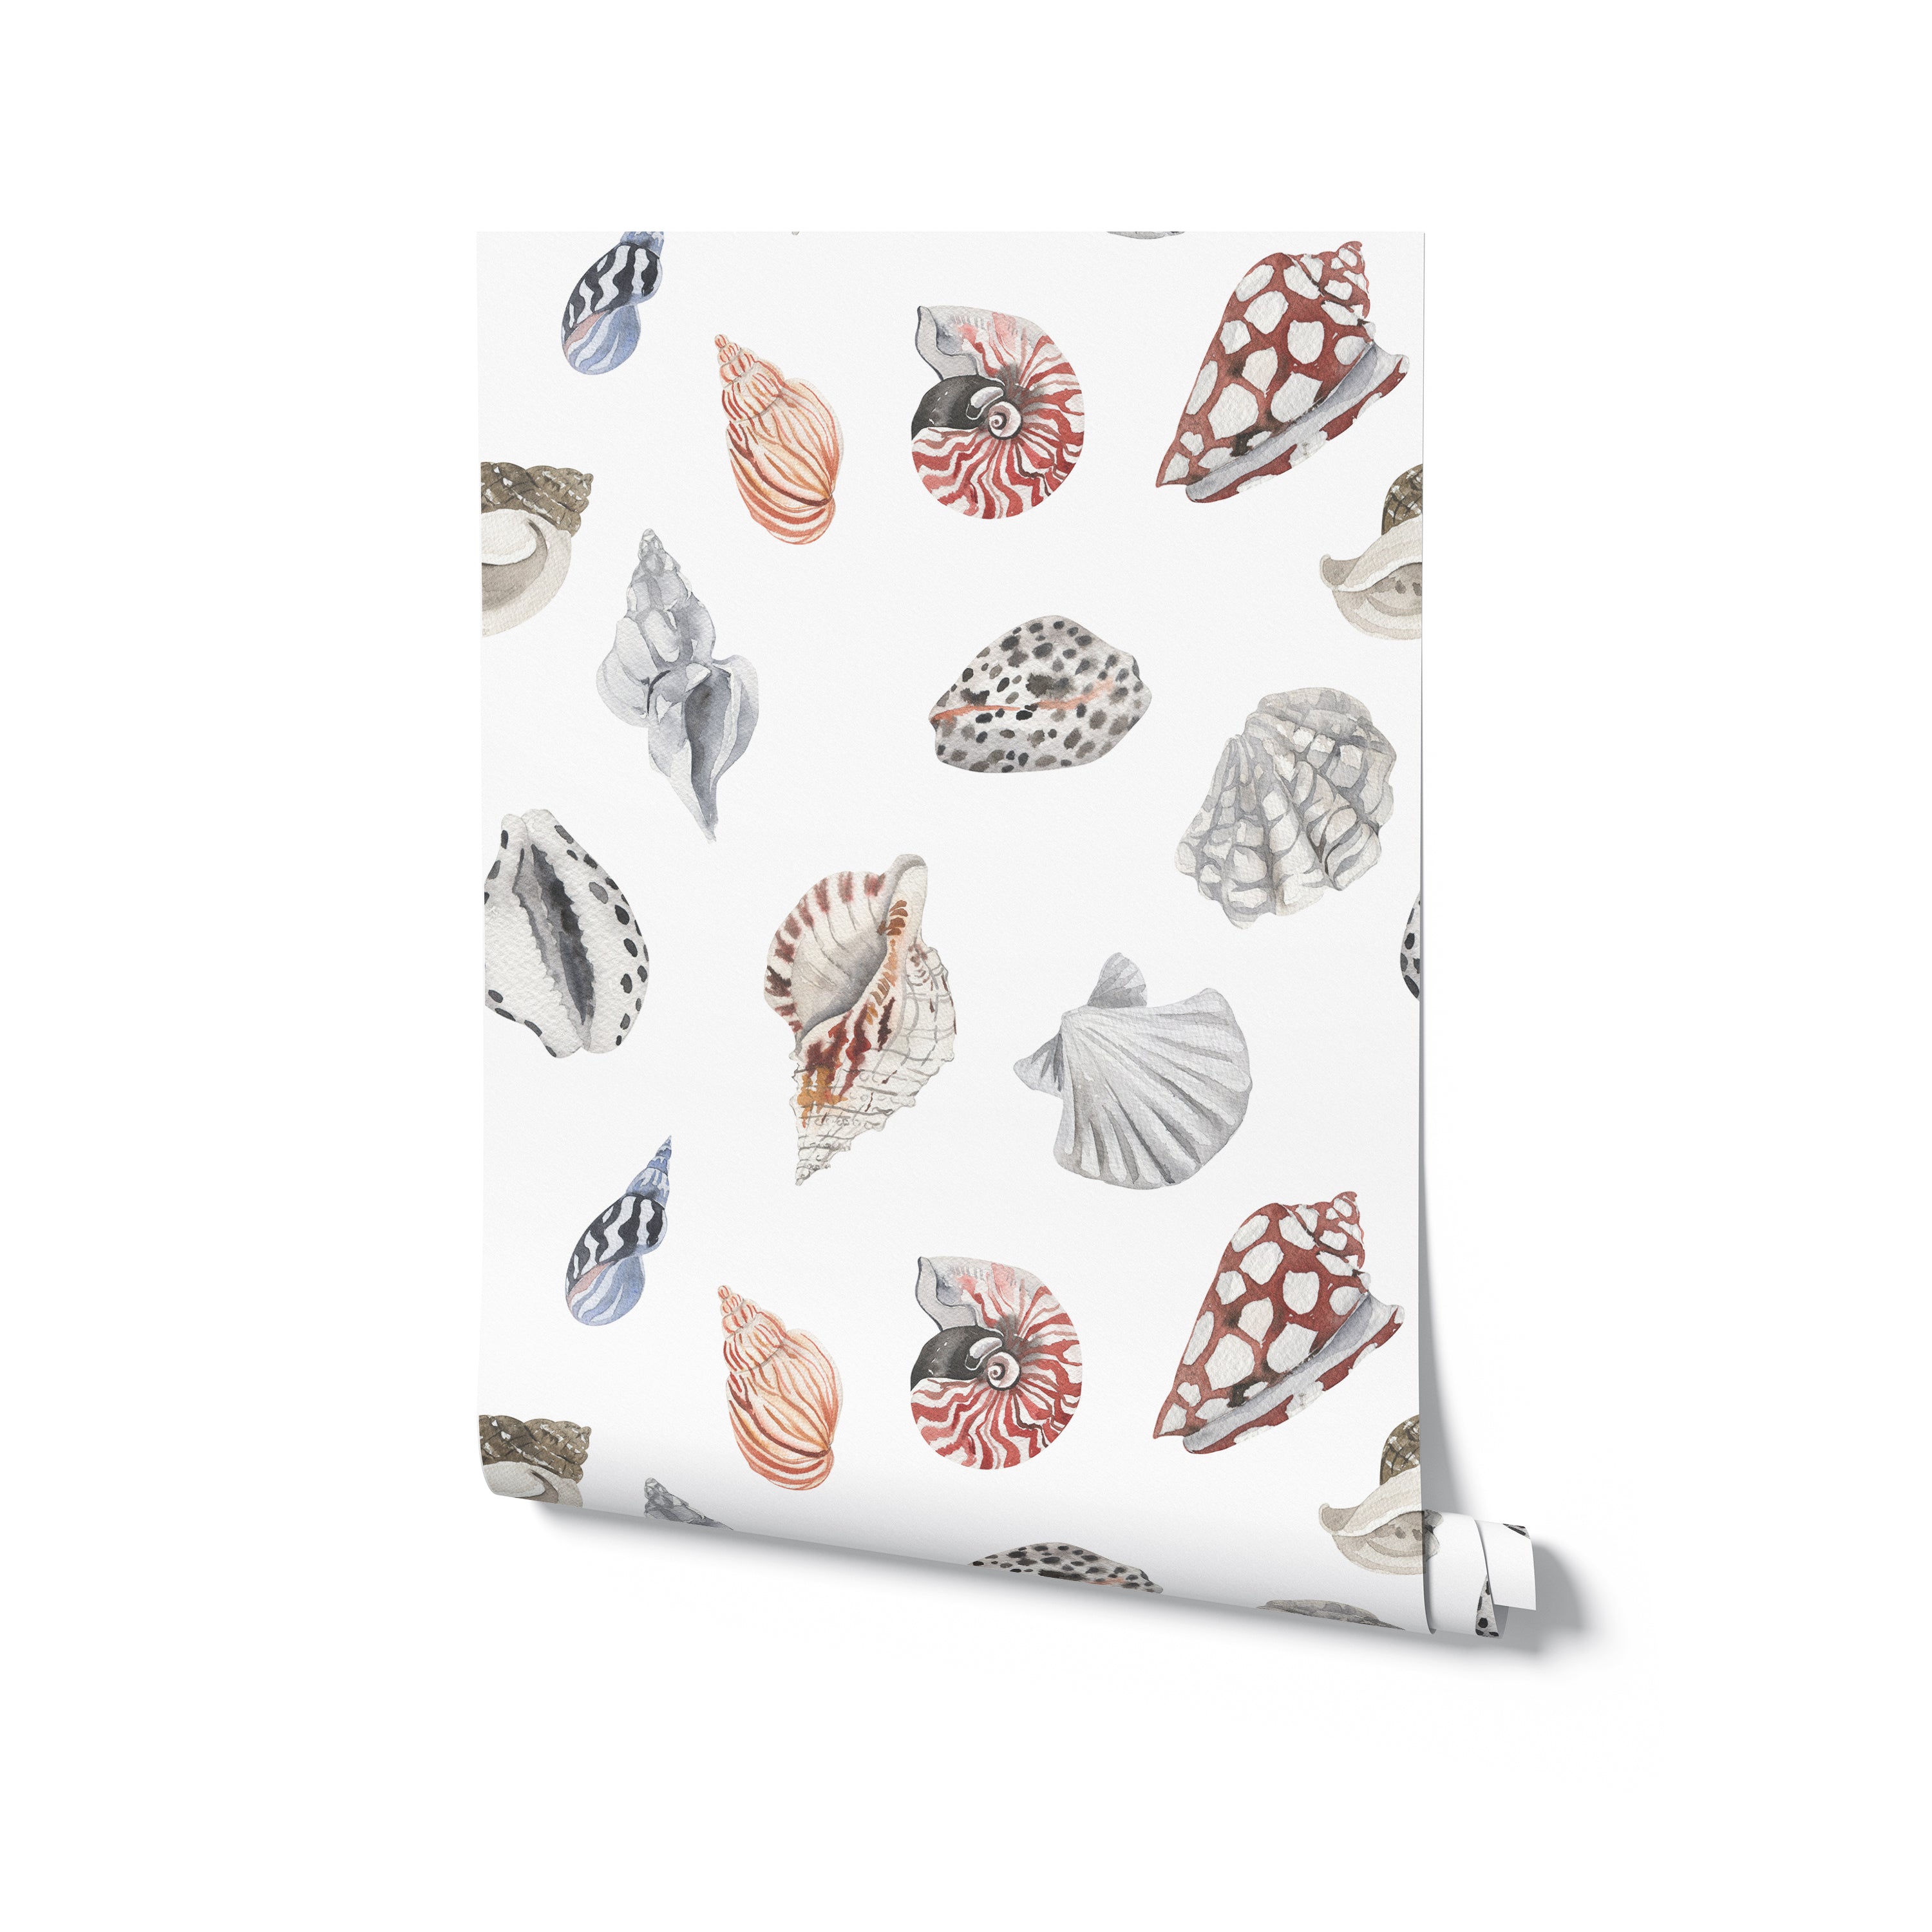 Roll of watercolor seashell wallpaper with varied shell designs in soft colors